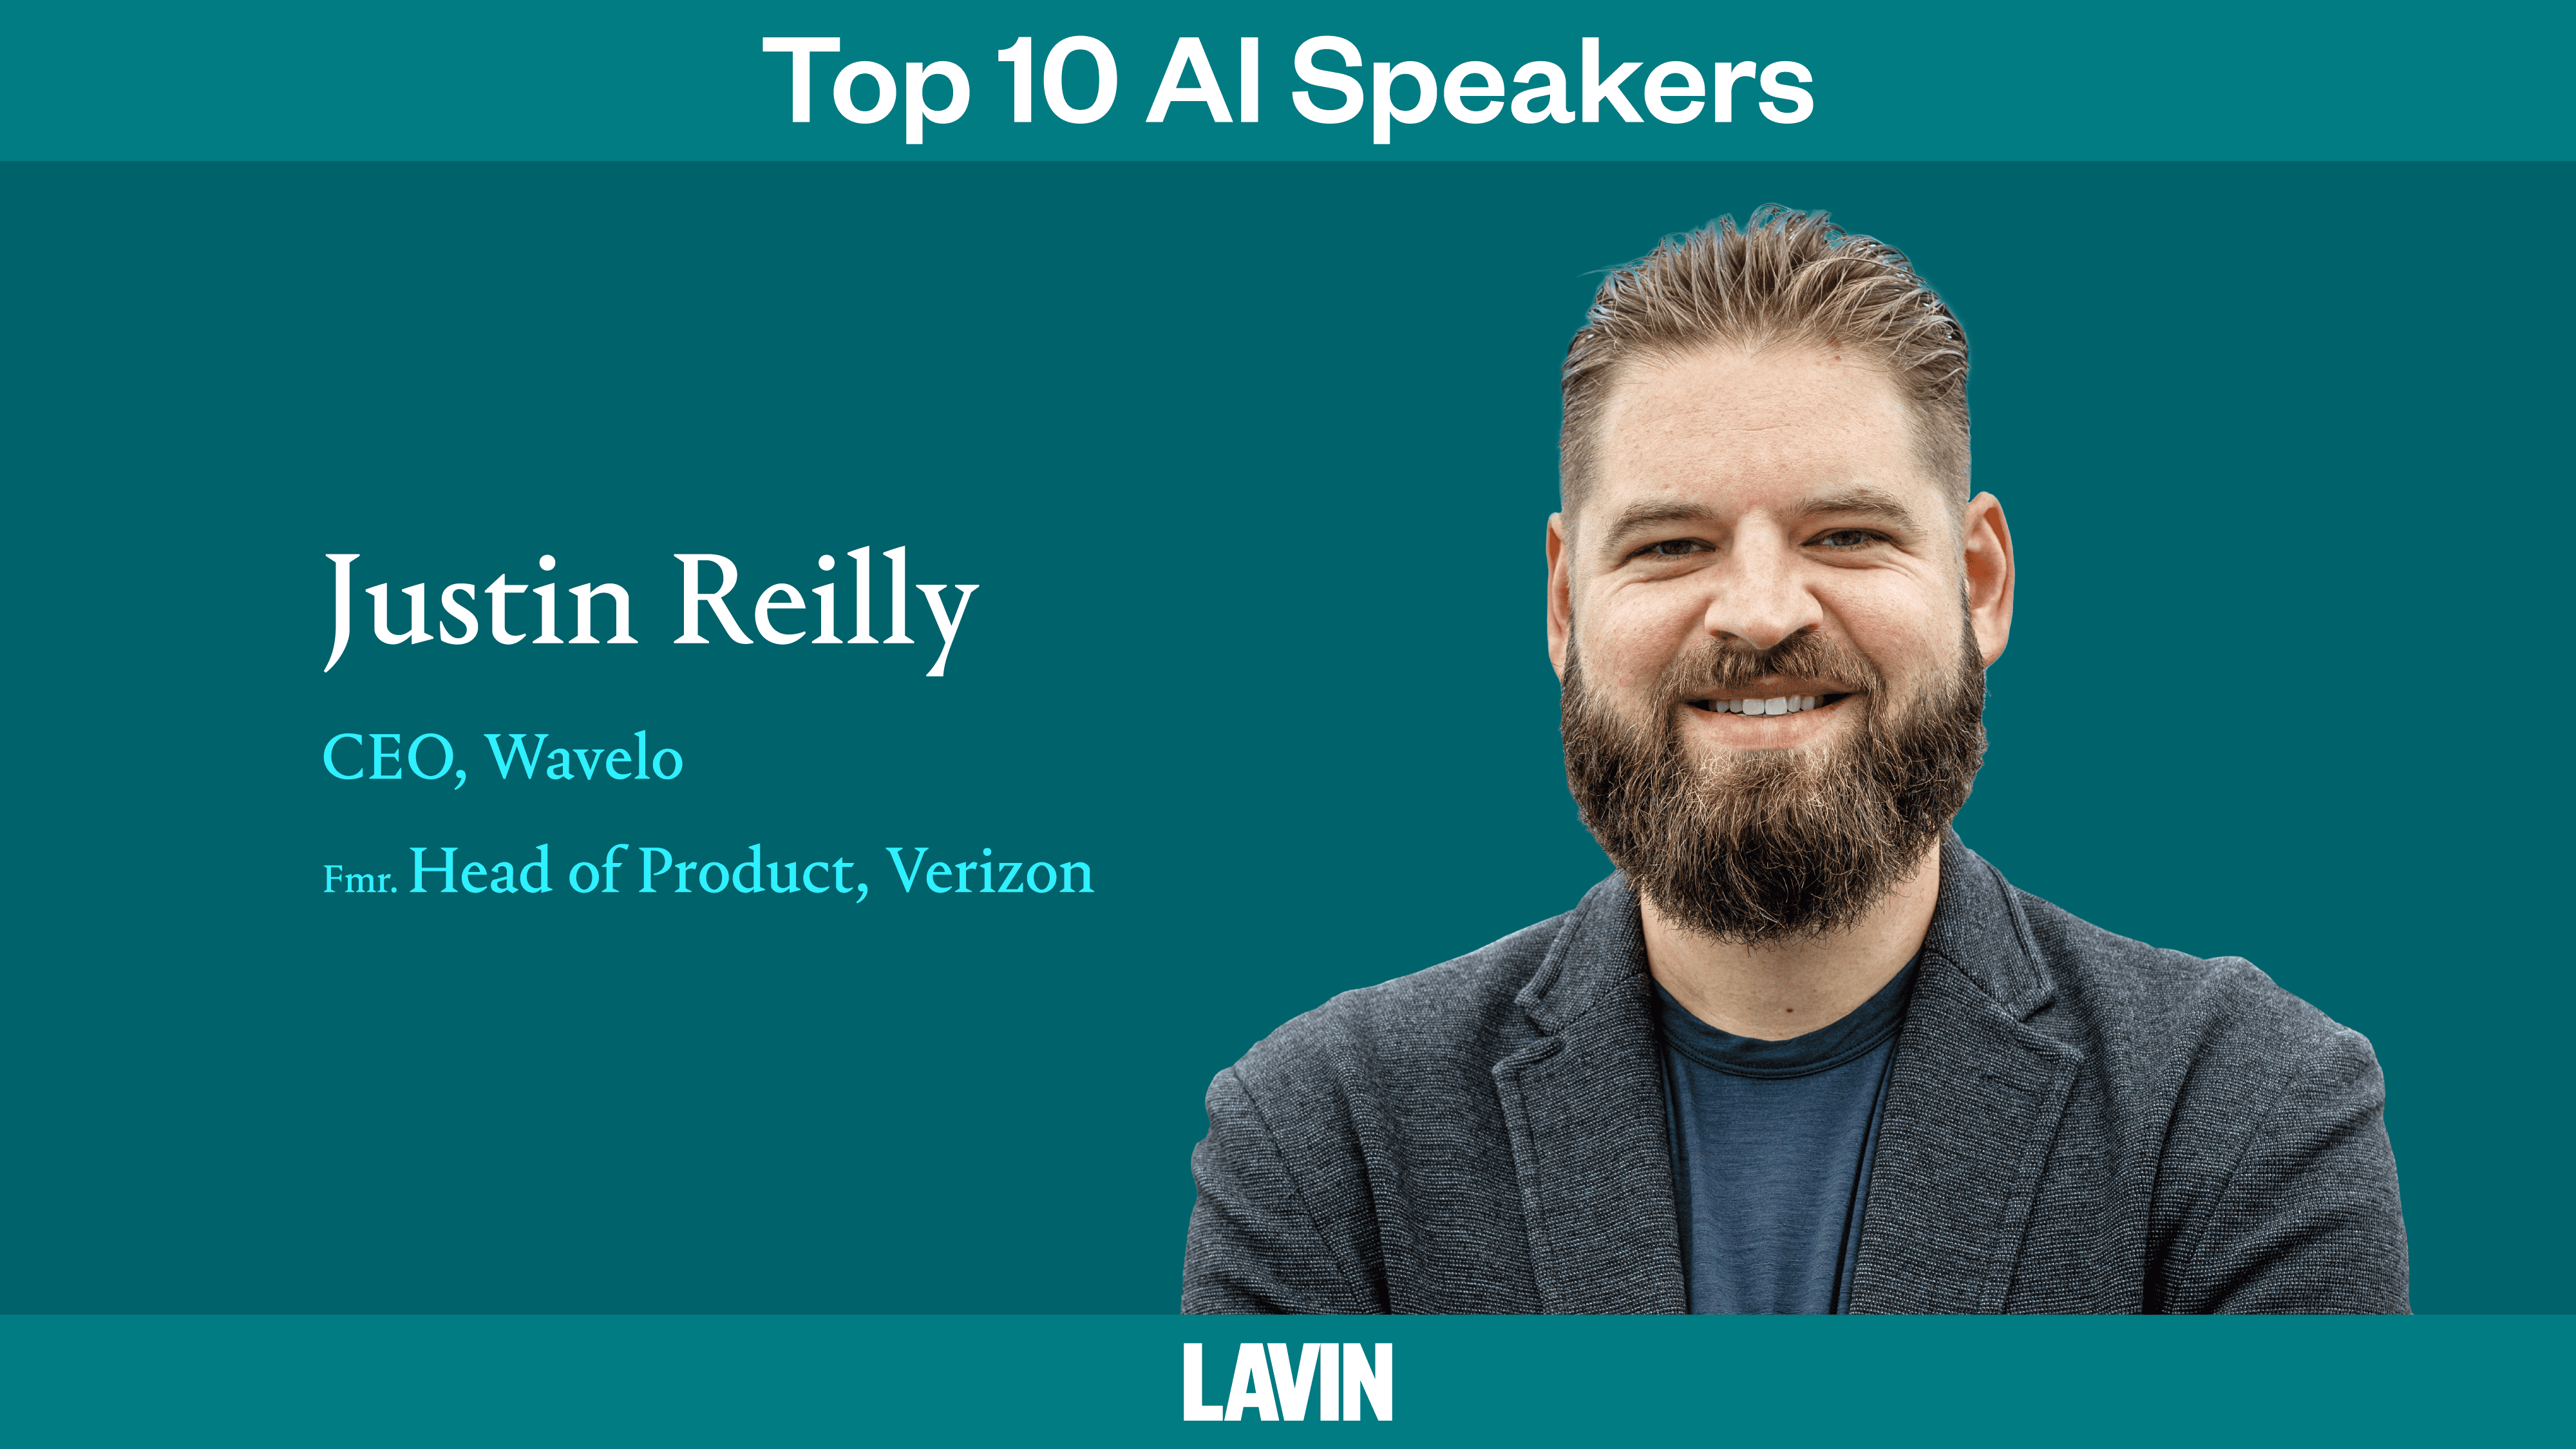 Top 10 AI Speaker Justin Reilly: Your Company Needs to Become “AI First”